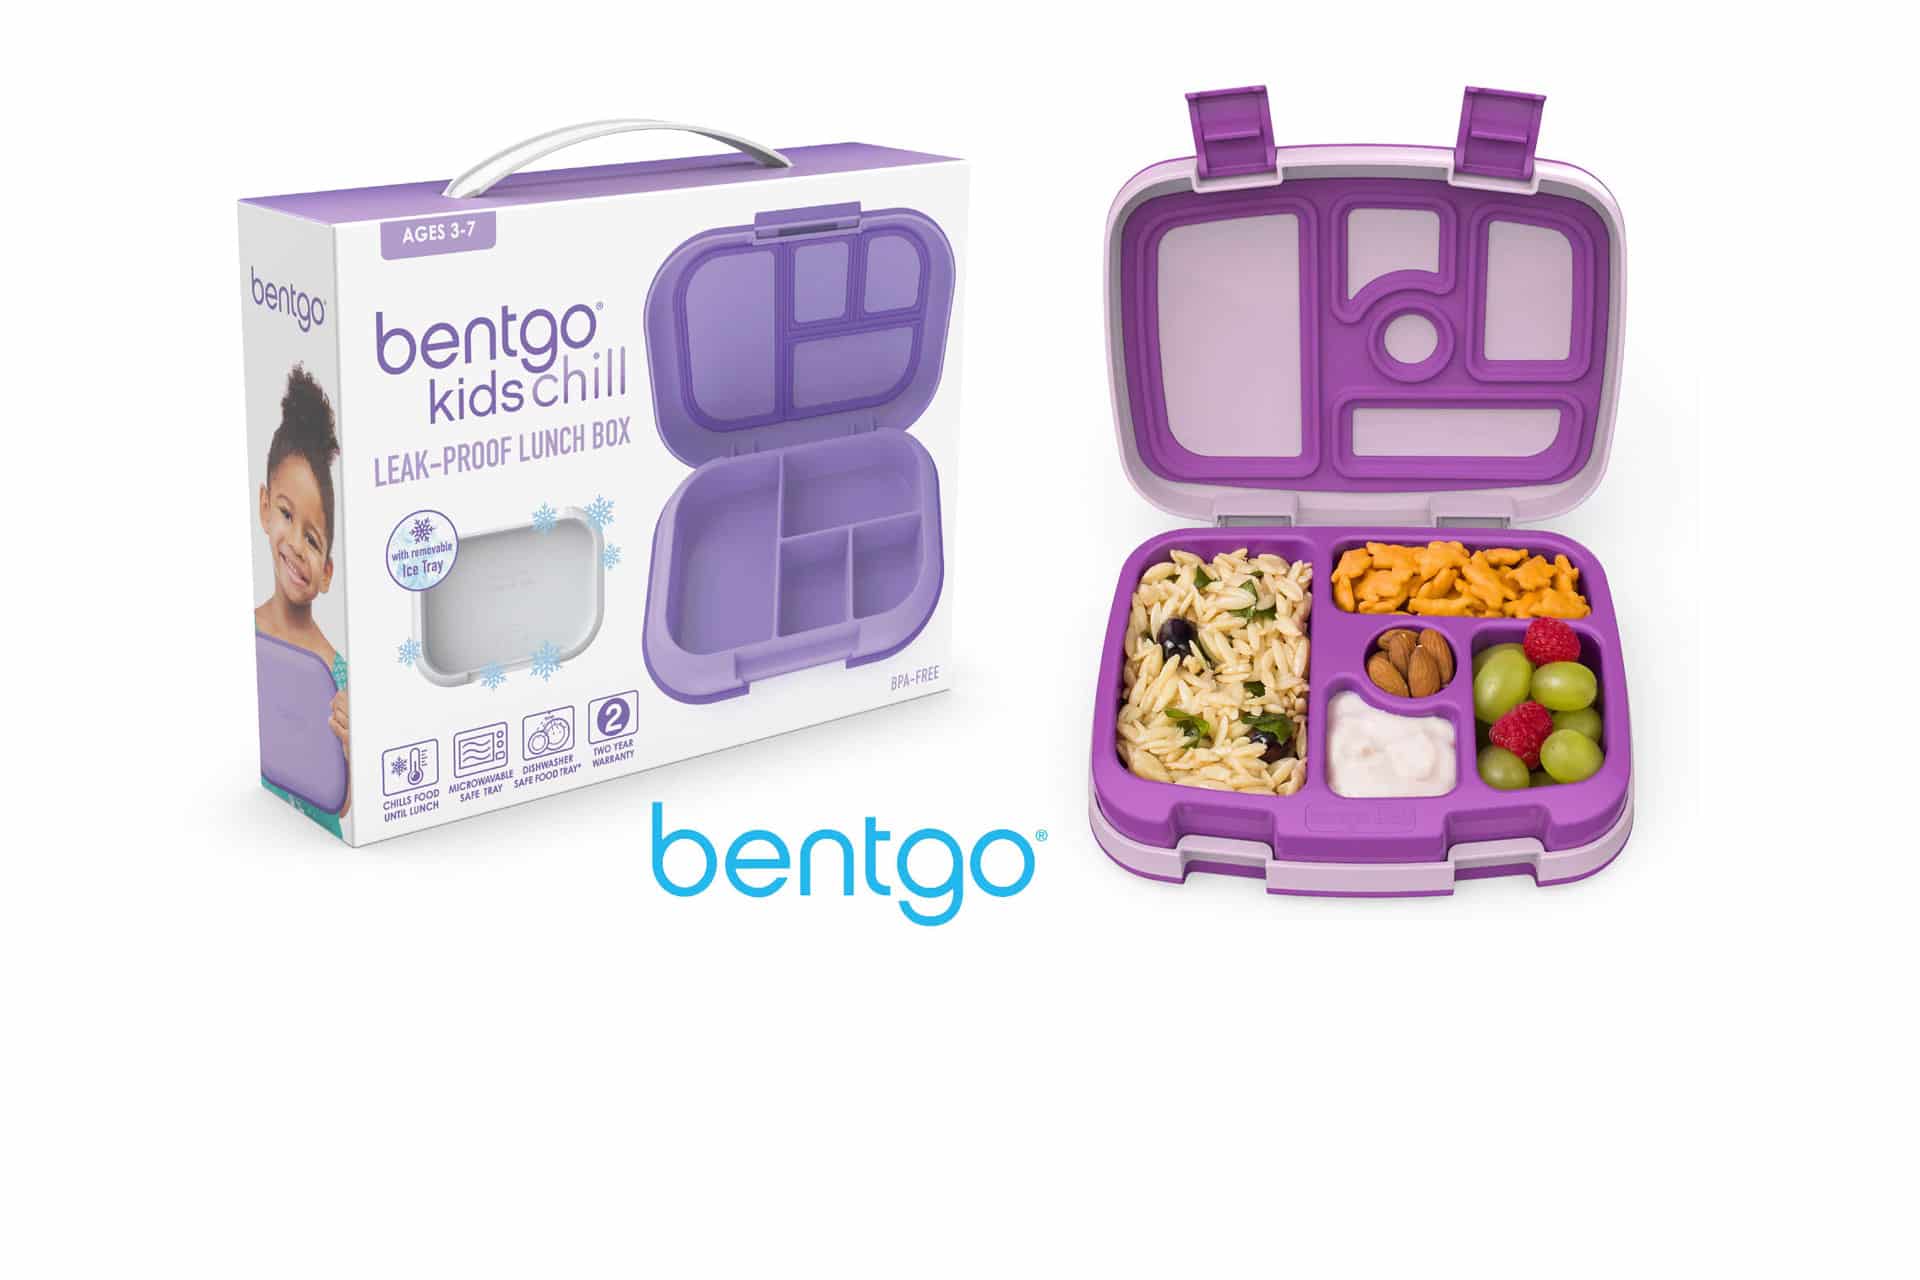 Bentgo Kids Chill Lunch Box - Parents Canada